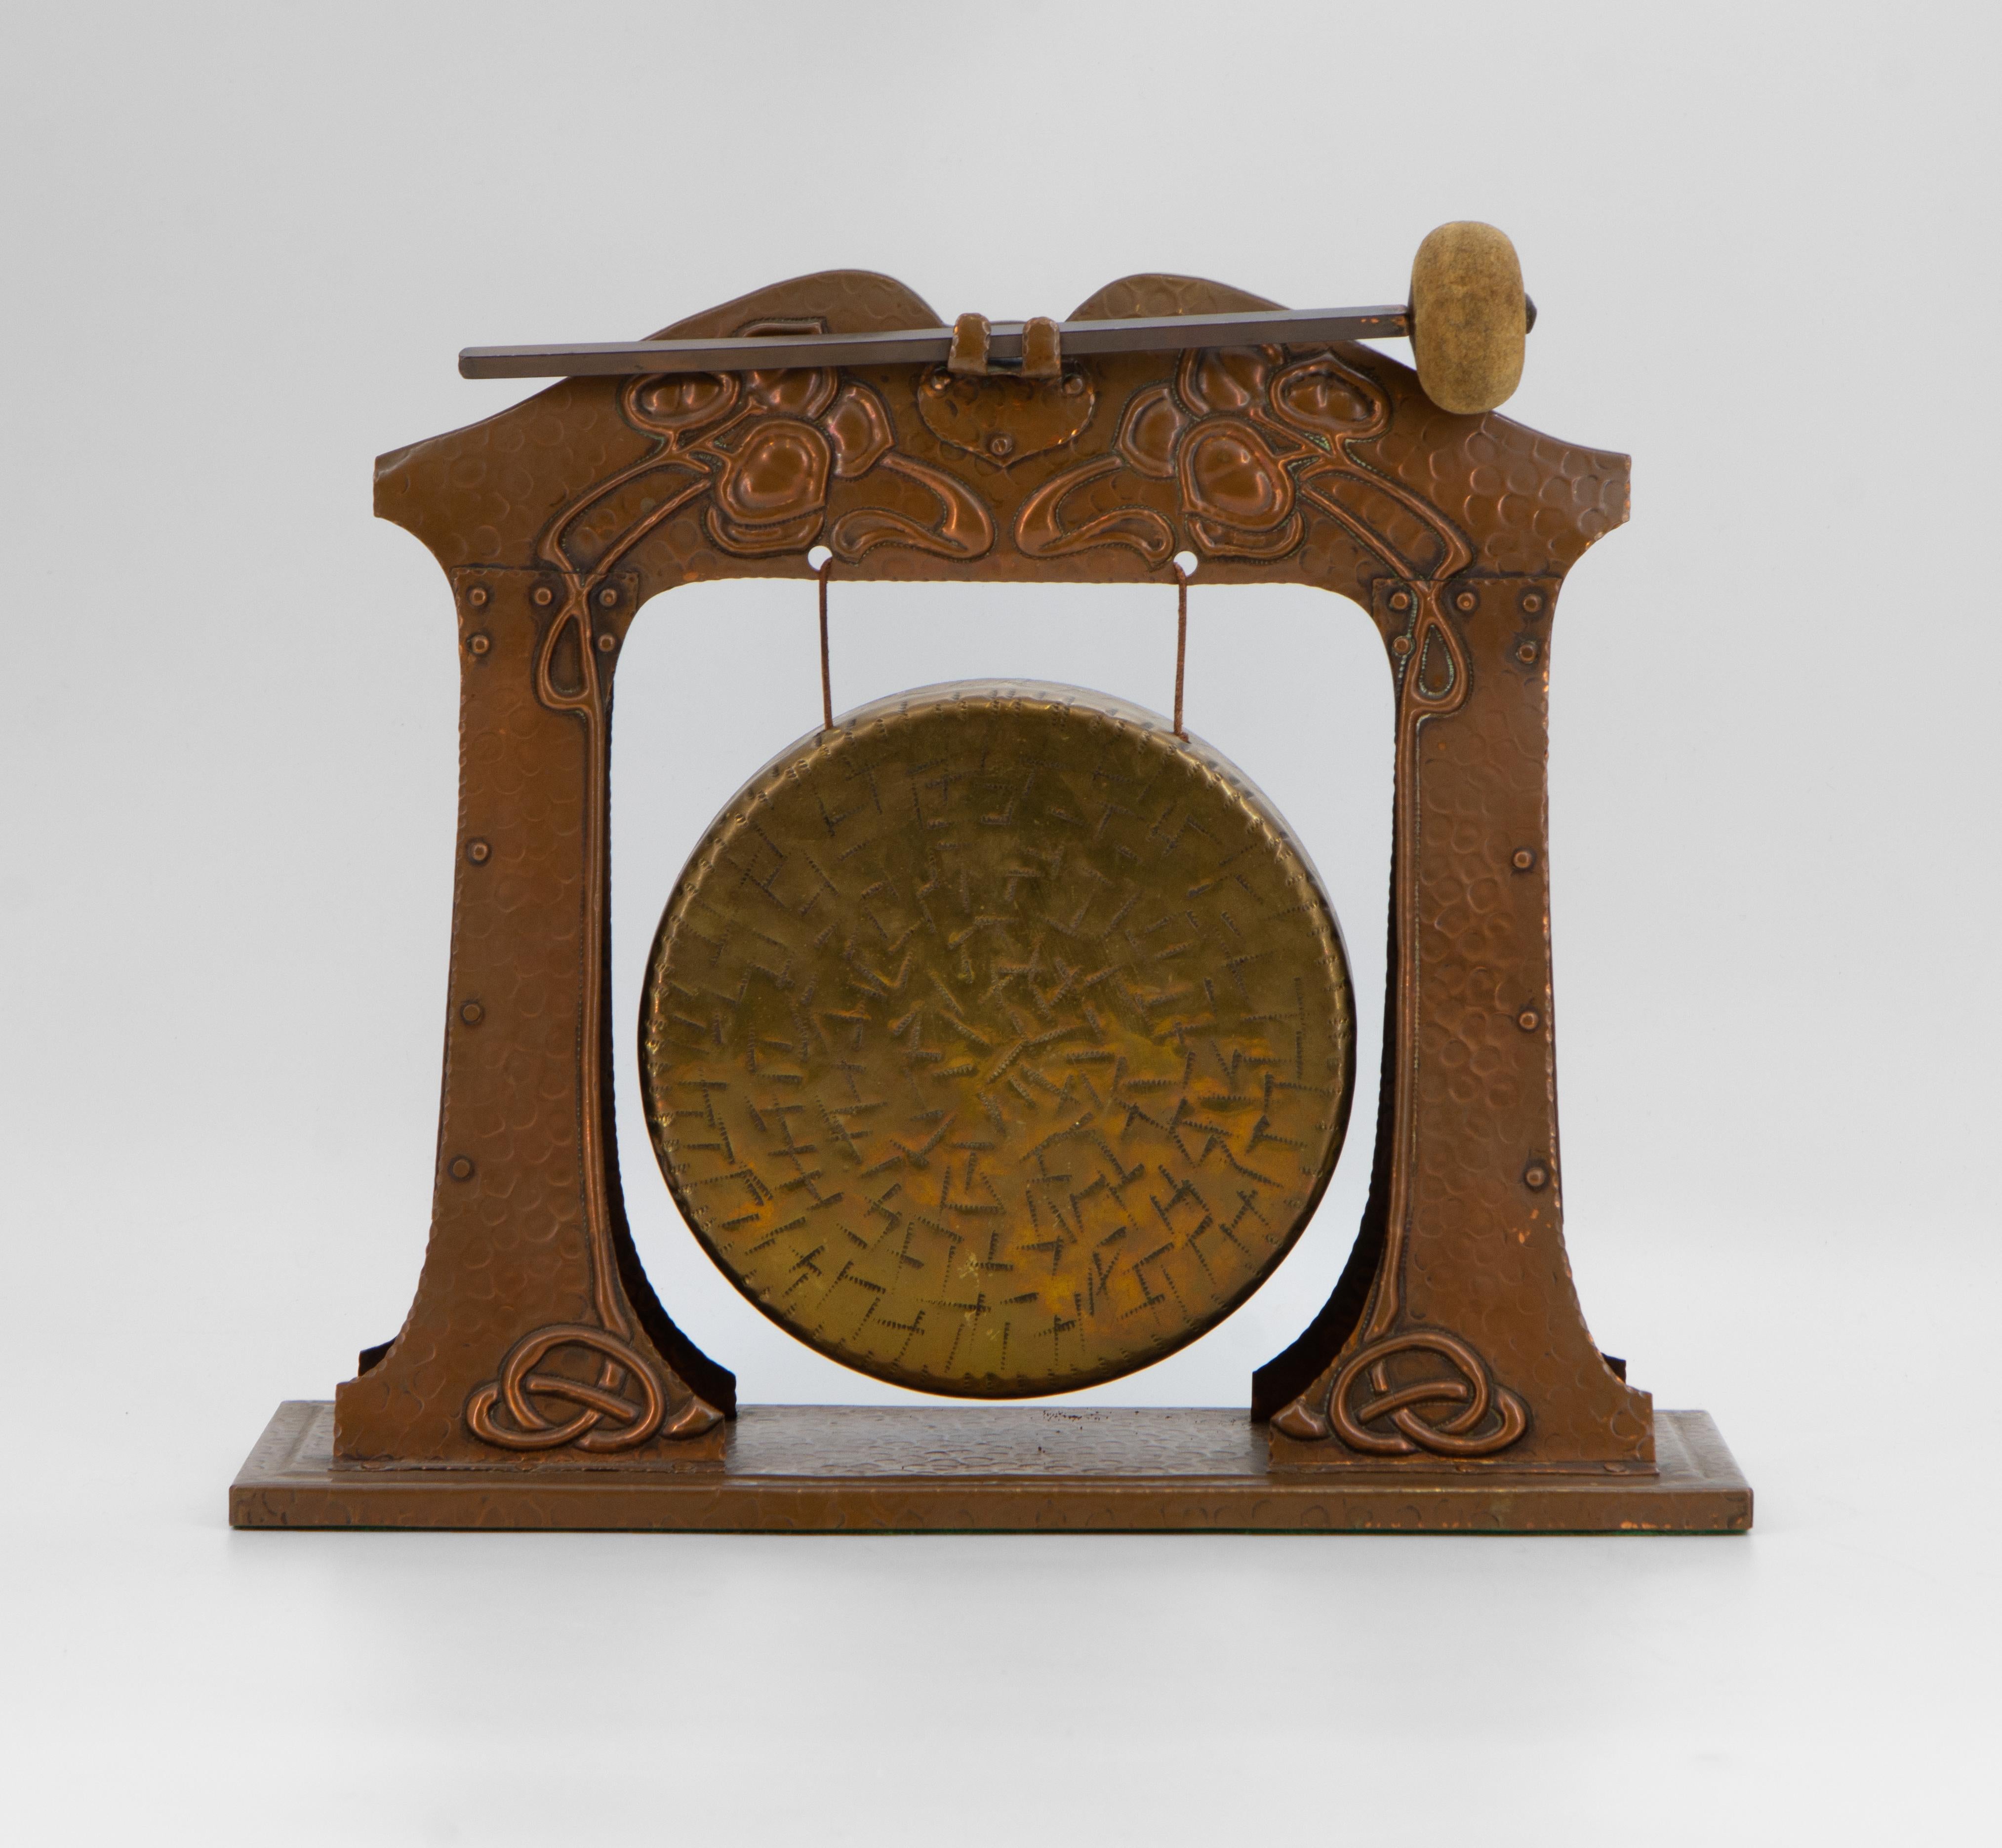 An Art Nouveau copper and brass table top dinner gong. Circa 1910.

The brass gong is suspended from the copper stand embossed with sinuous stylized flower design. It has a lovely resonant ring when struck by the original copper-handled